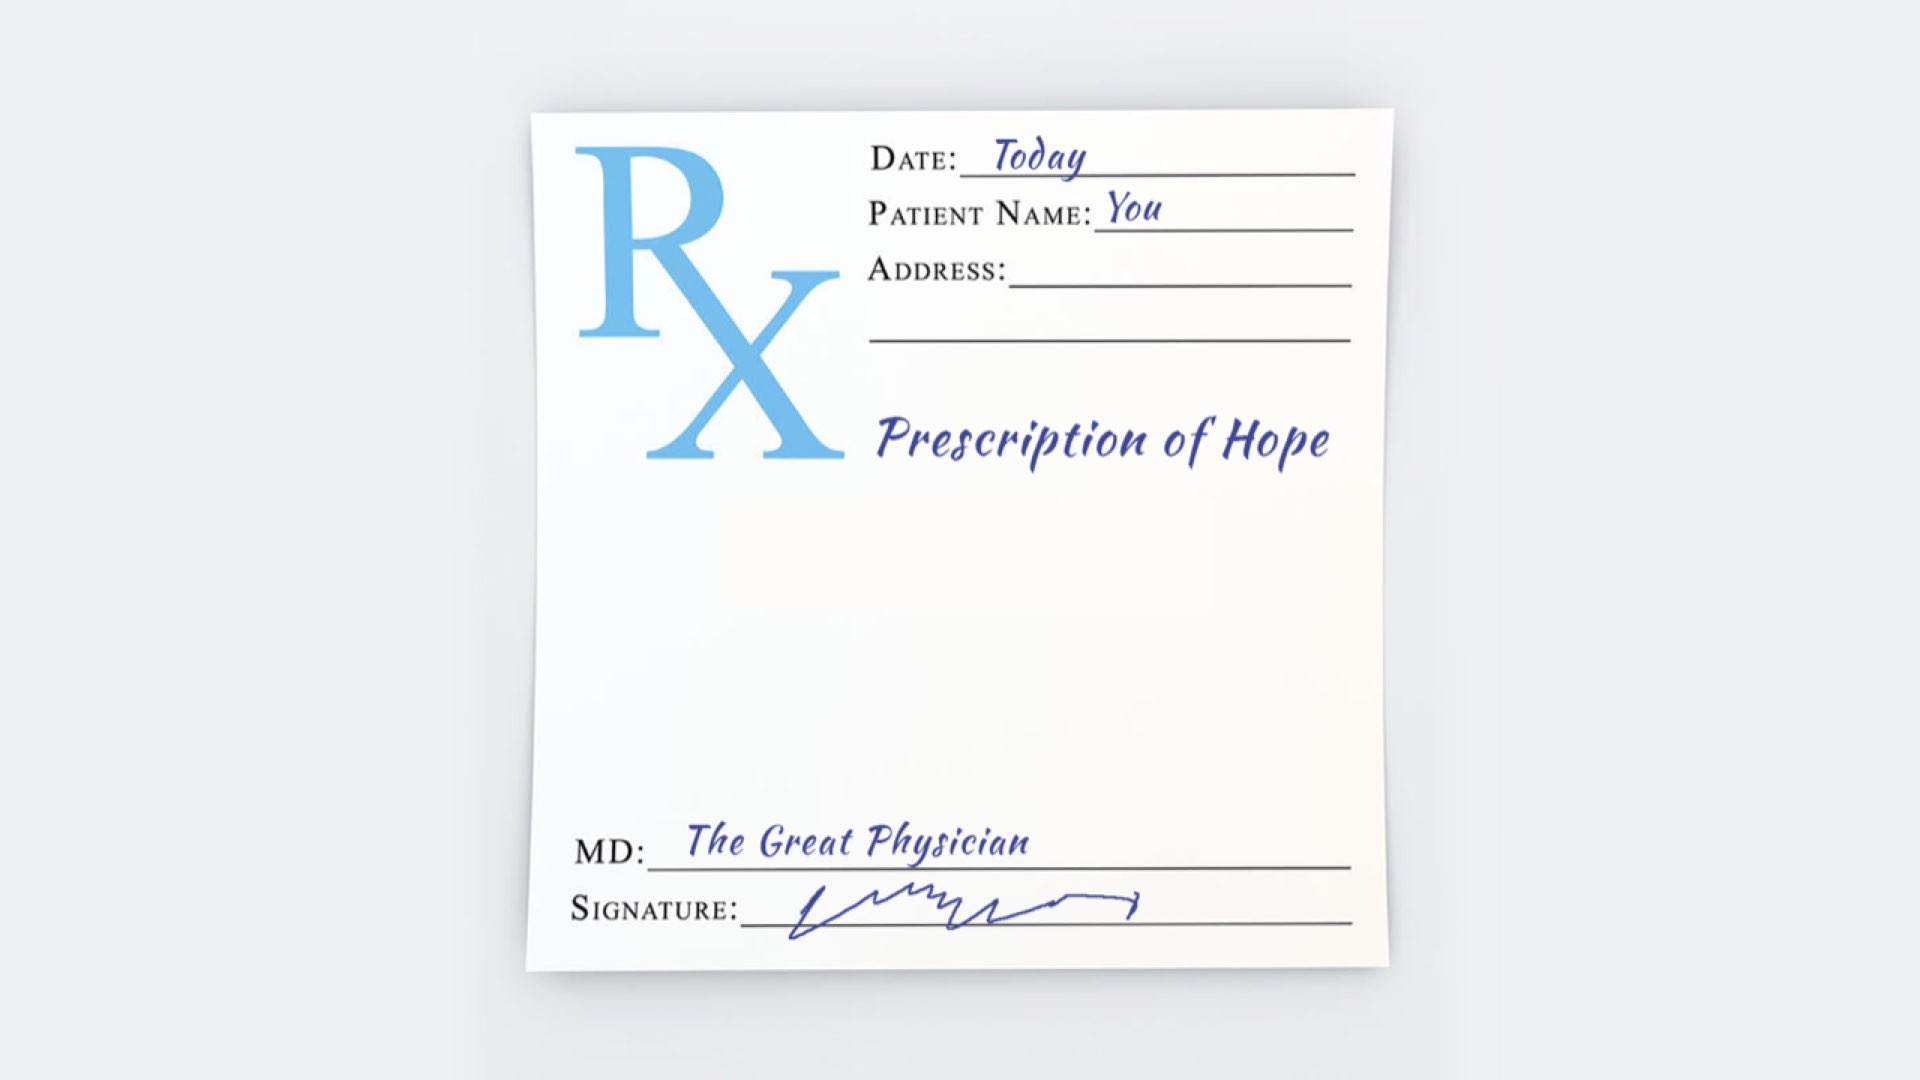 Prescription of Hope by Missy Grinnell